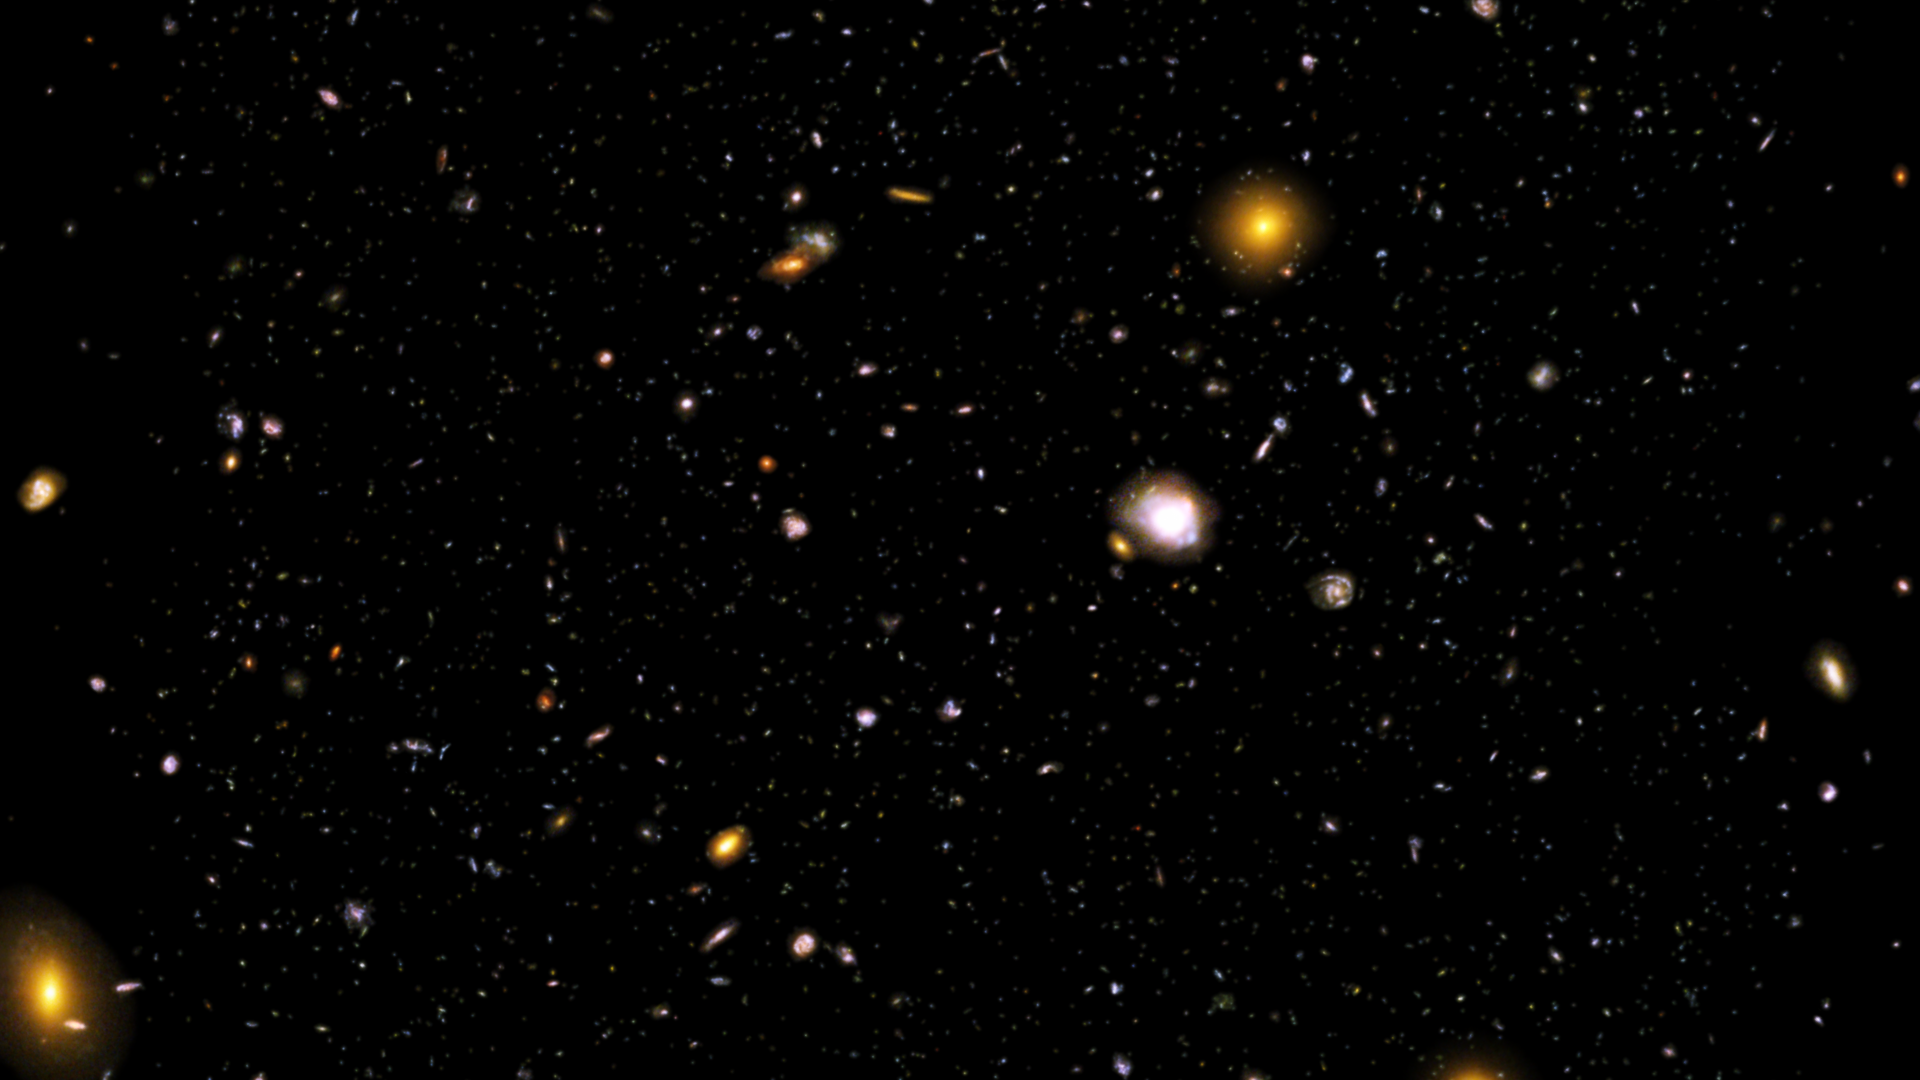 Preview Image for Across the Universe: The Hubble Ultra Deep Field